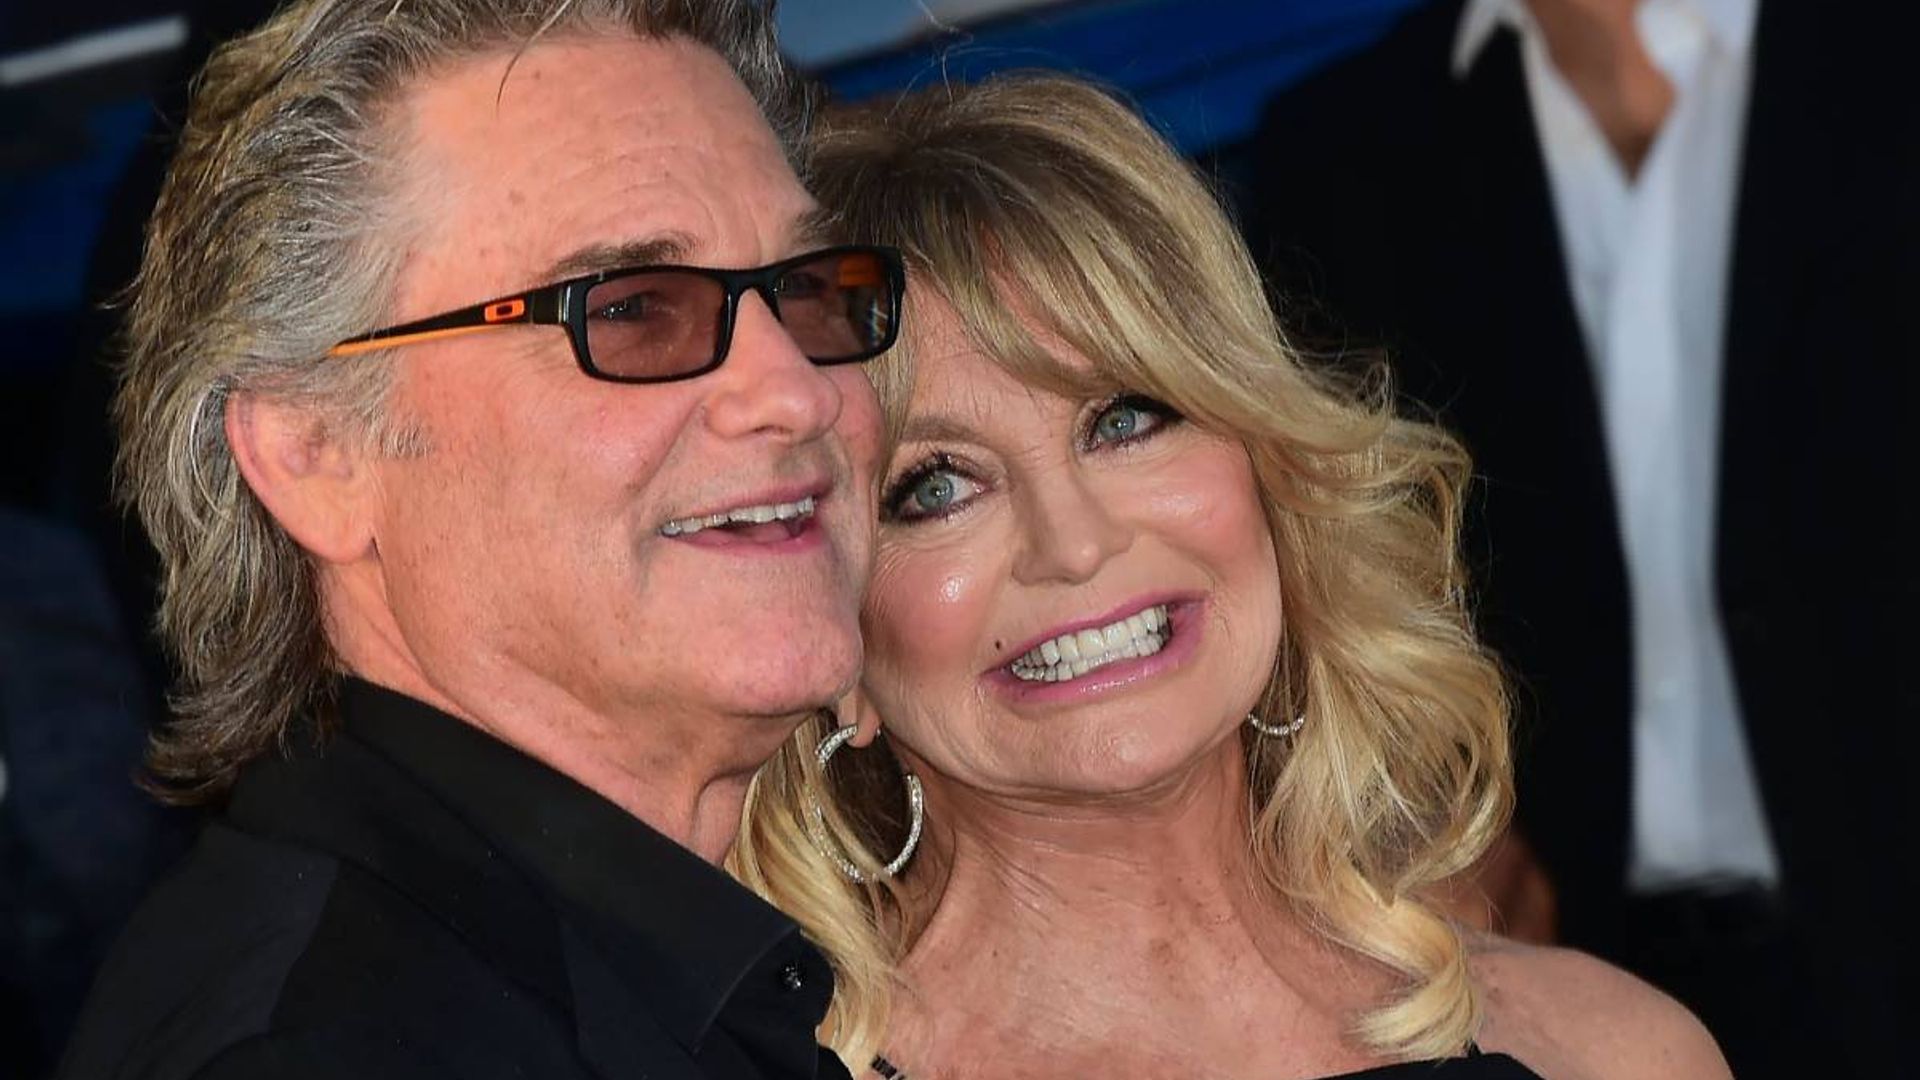 Goldie Hawn makes unexpected revelation about relationship with Kurt Russell